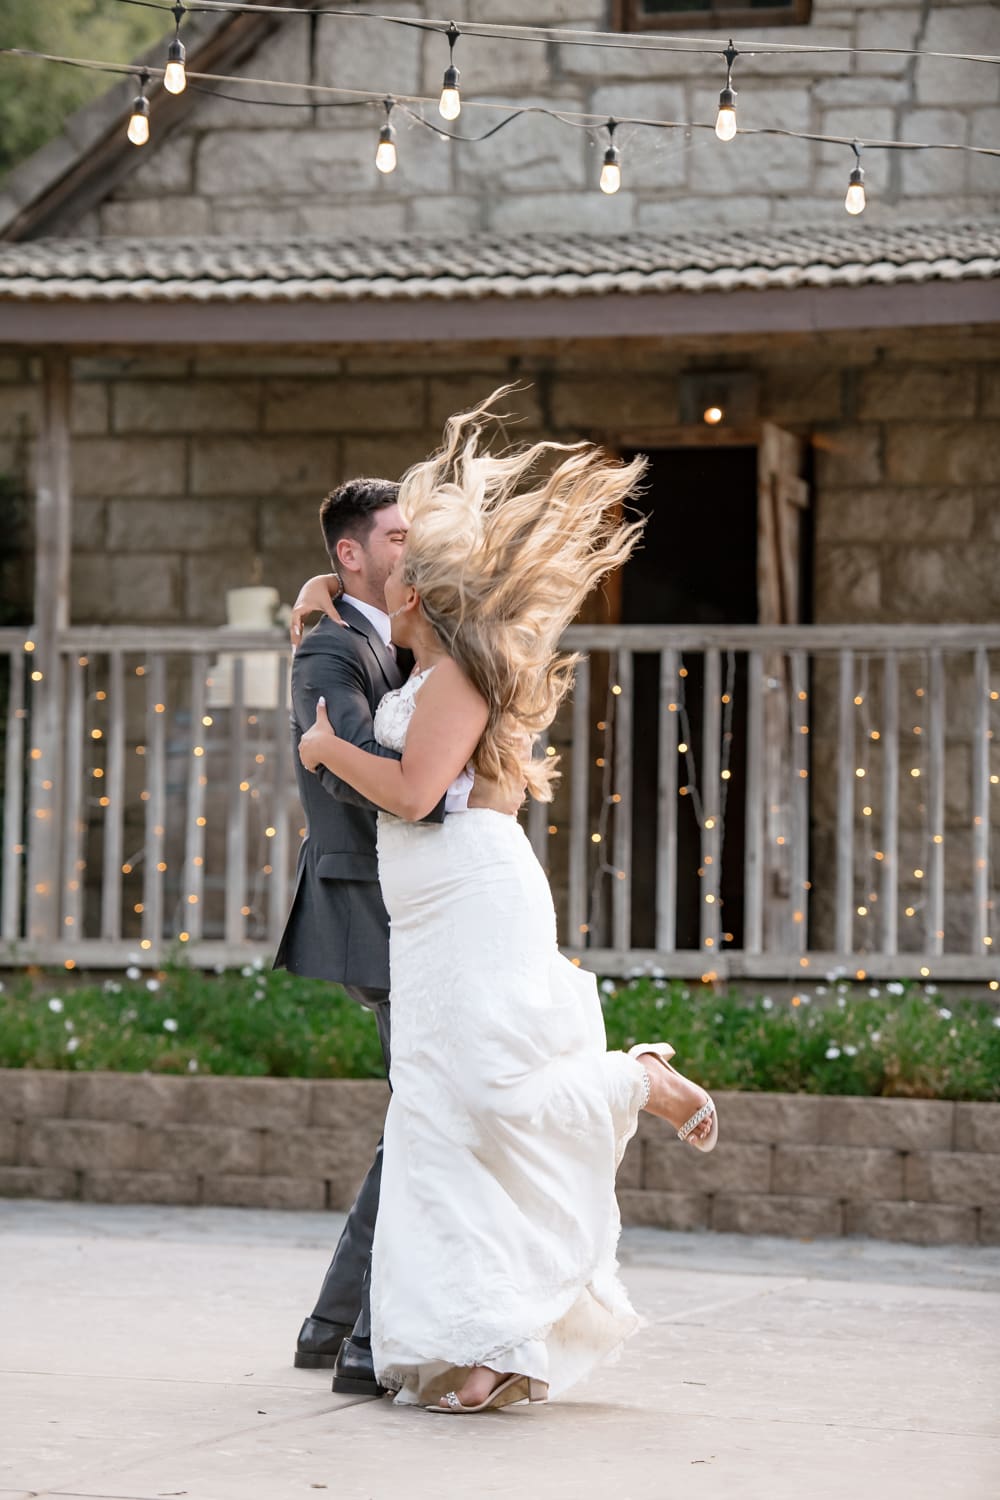 Wedding reception at The Stone House in Temecula, CA